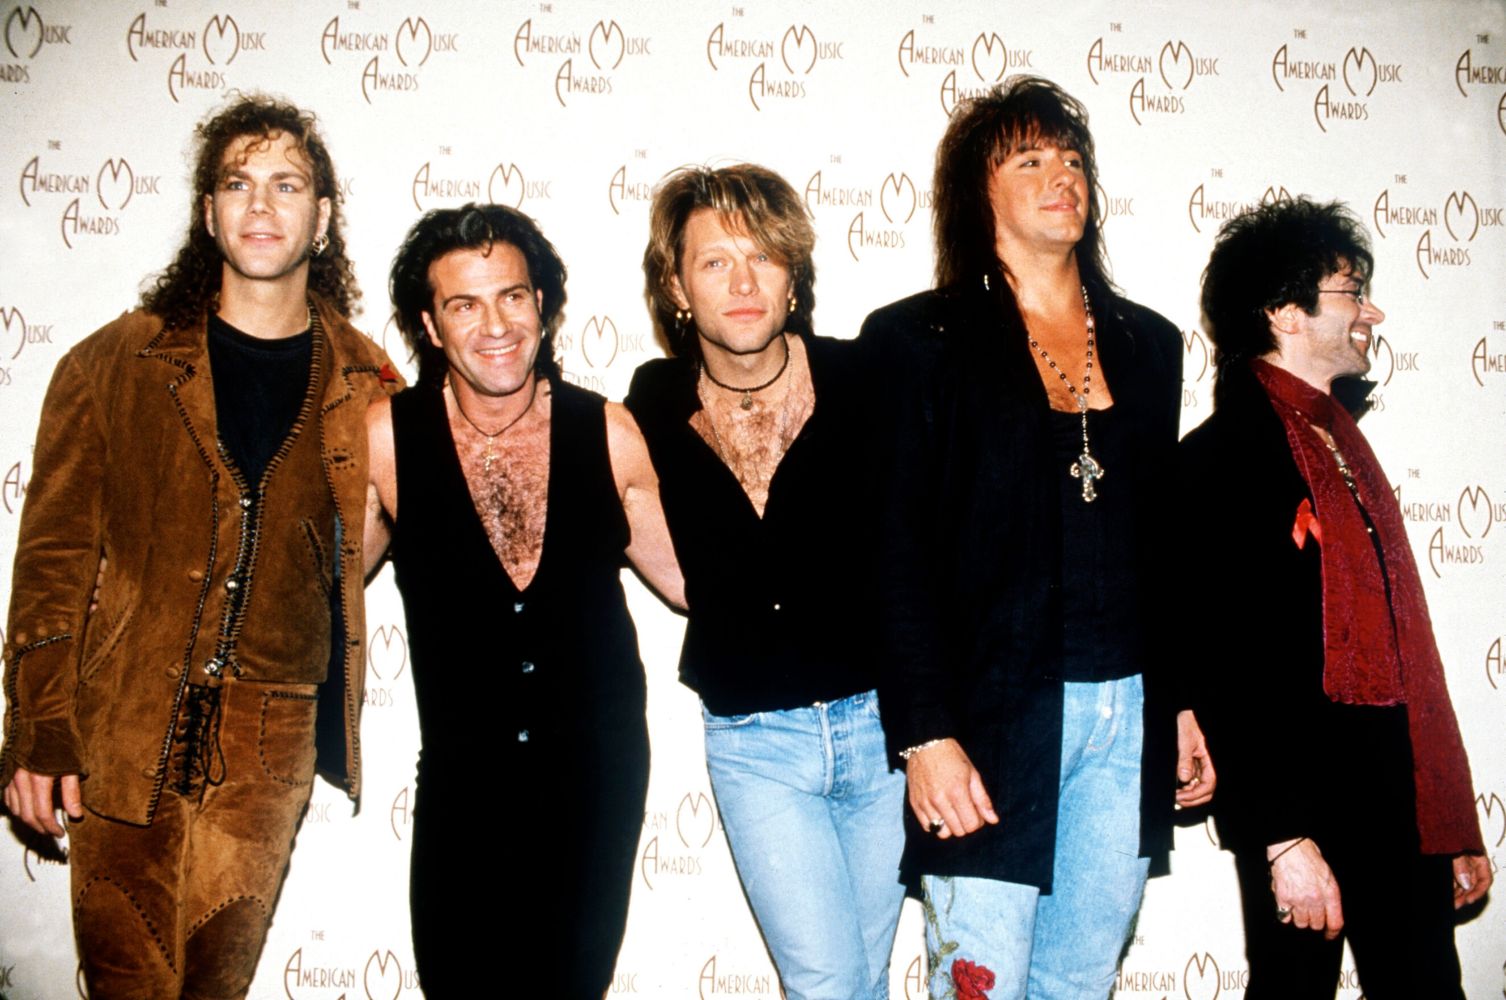 <p><em>Keep The Faith</em>, the band’s fifth album was the last with their original lineup. It featured hits “Keep The Faith,” “In These Arms”, and “Bed of Roses.”</p>